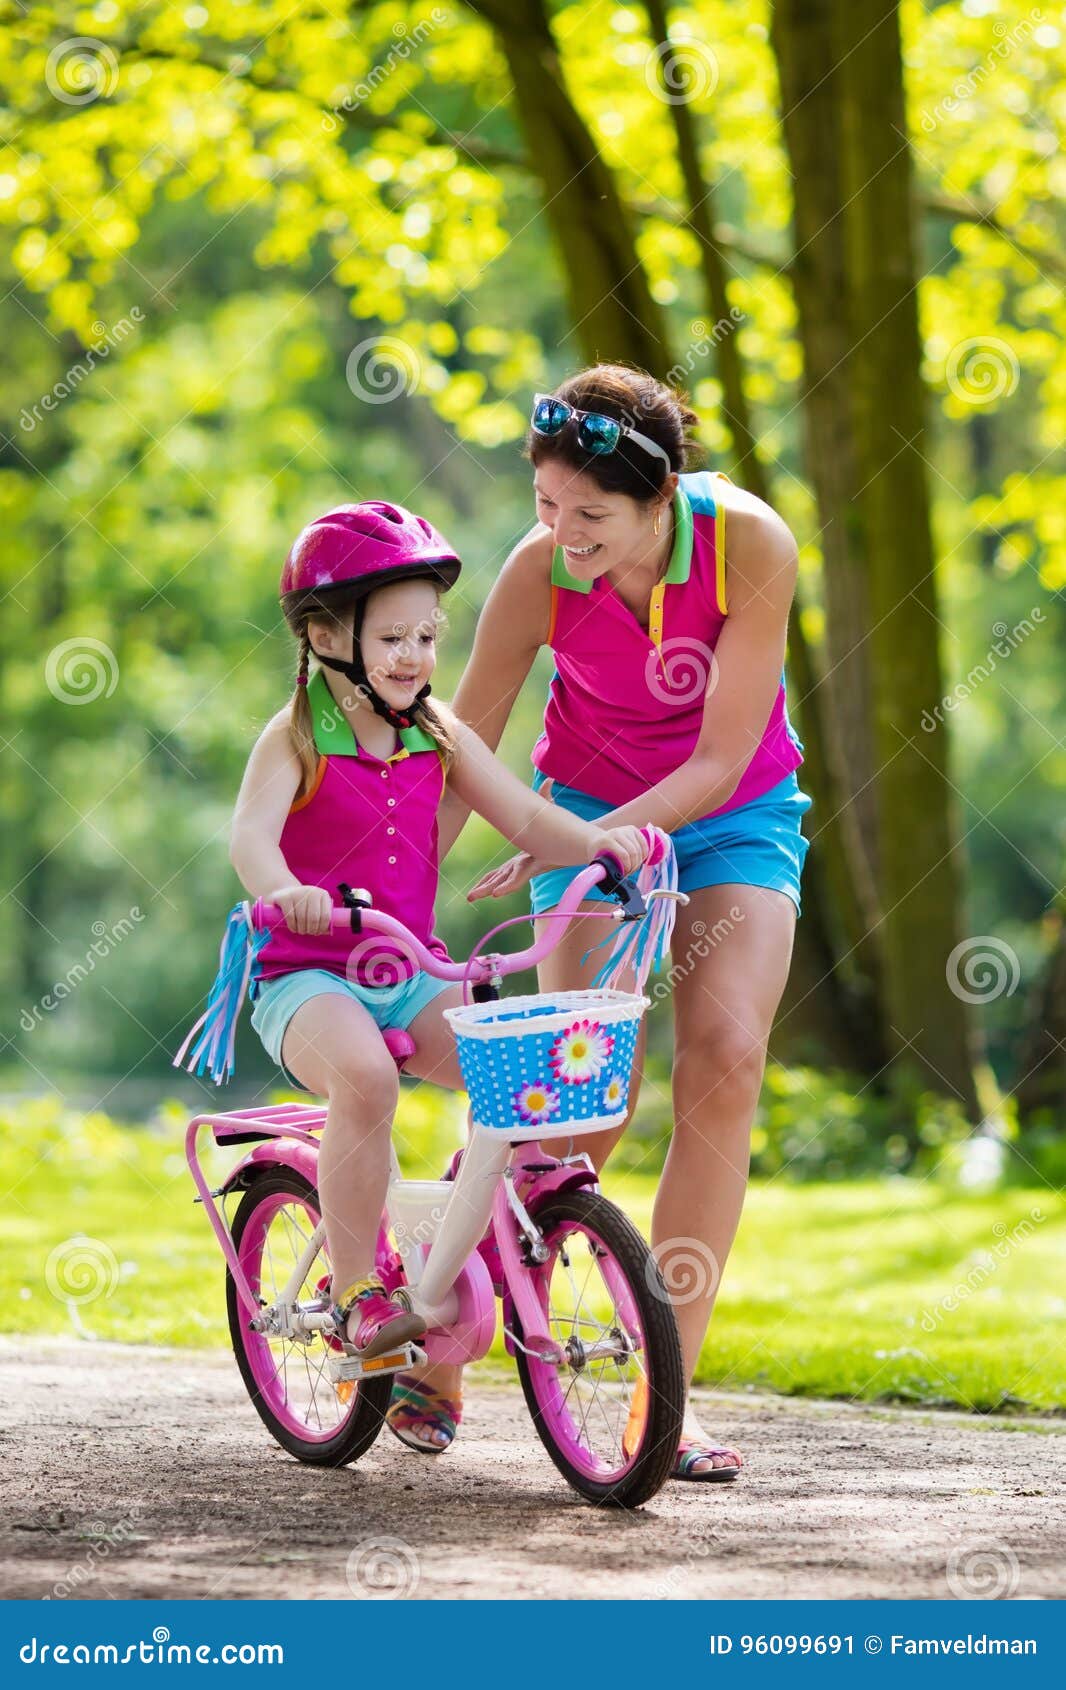 how to teach my daughter to ride a bike